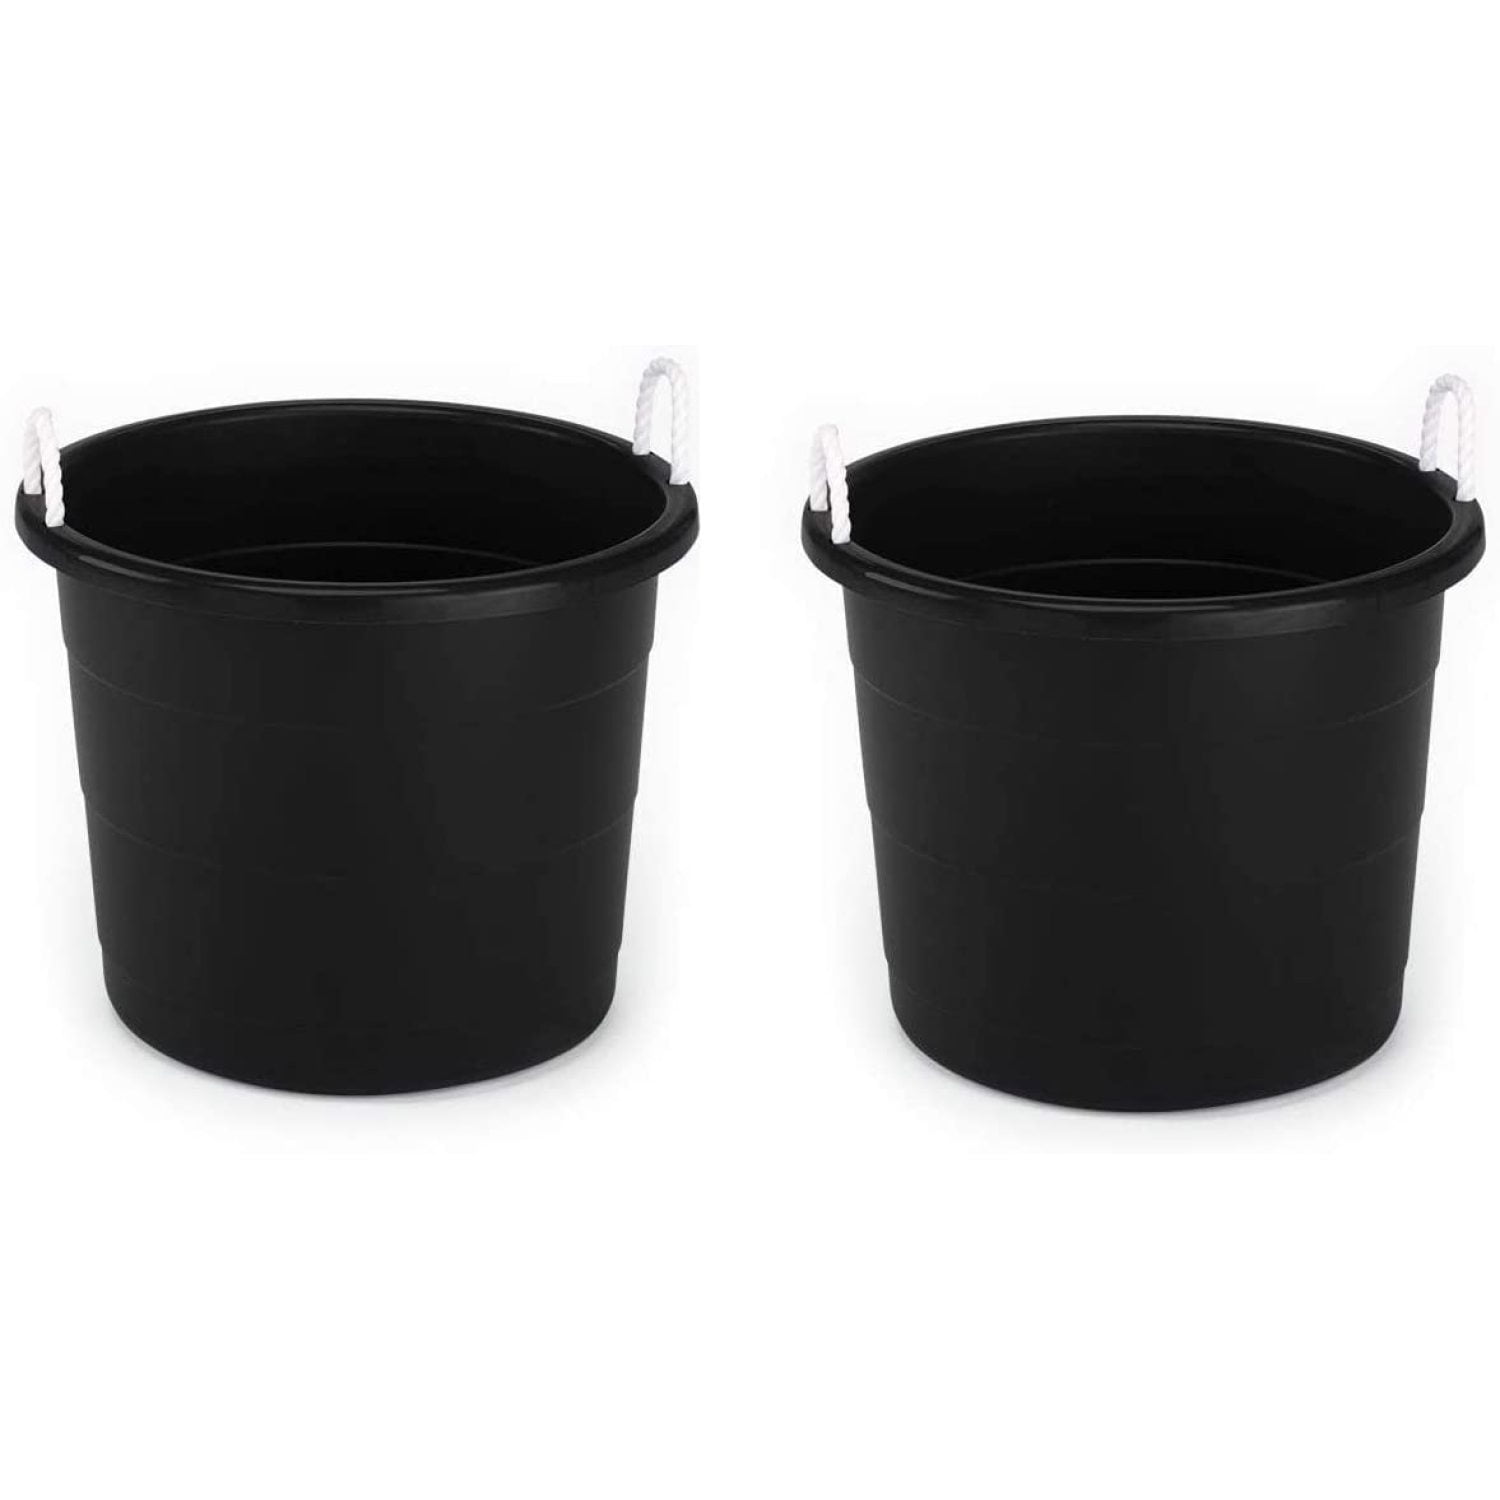 Bilot Multipurpose 17 Gallon Plastic Open-Top Round Utility Tub with Rope Handles for Indoor or Outdoor Home Organization, Black (2 Pack) -